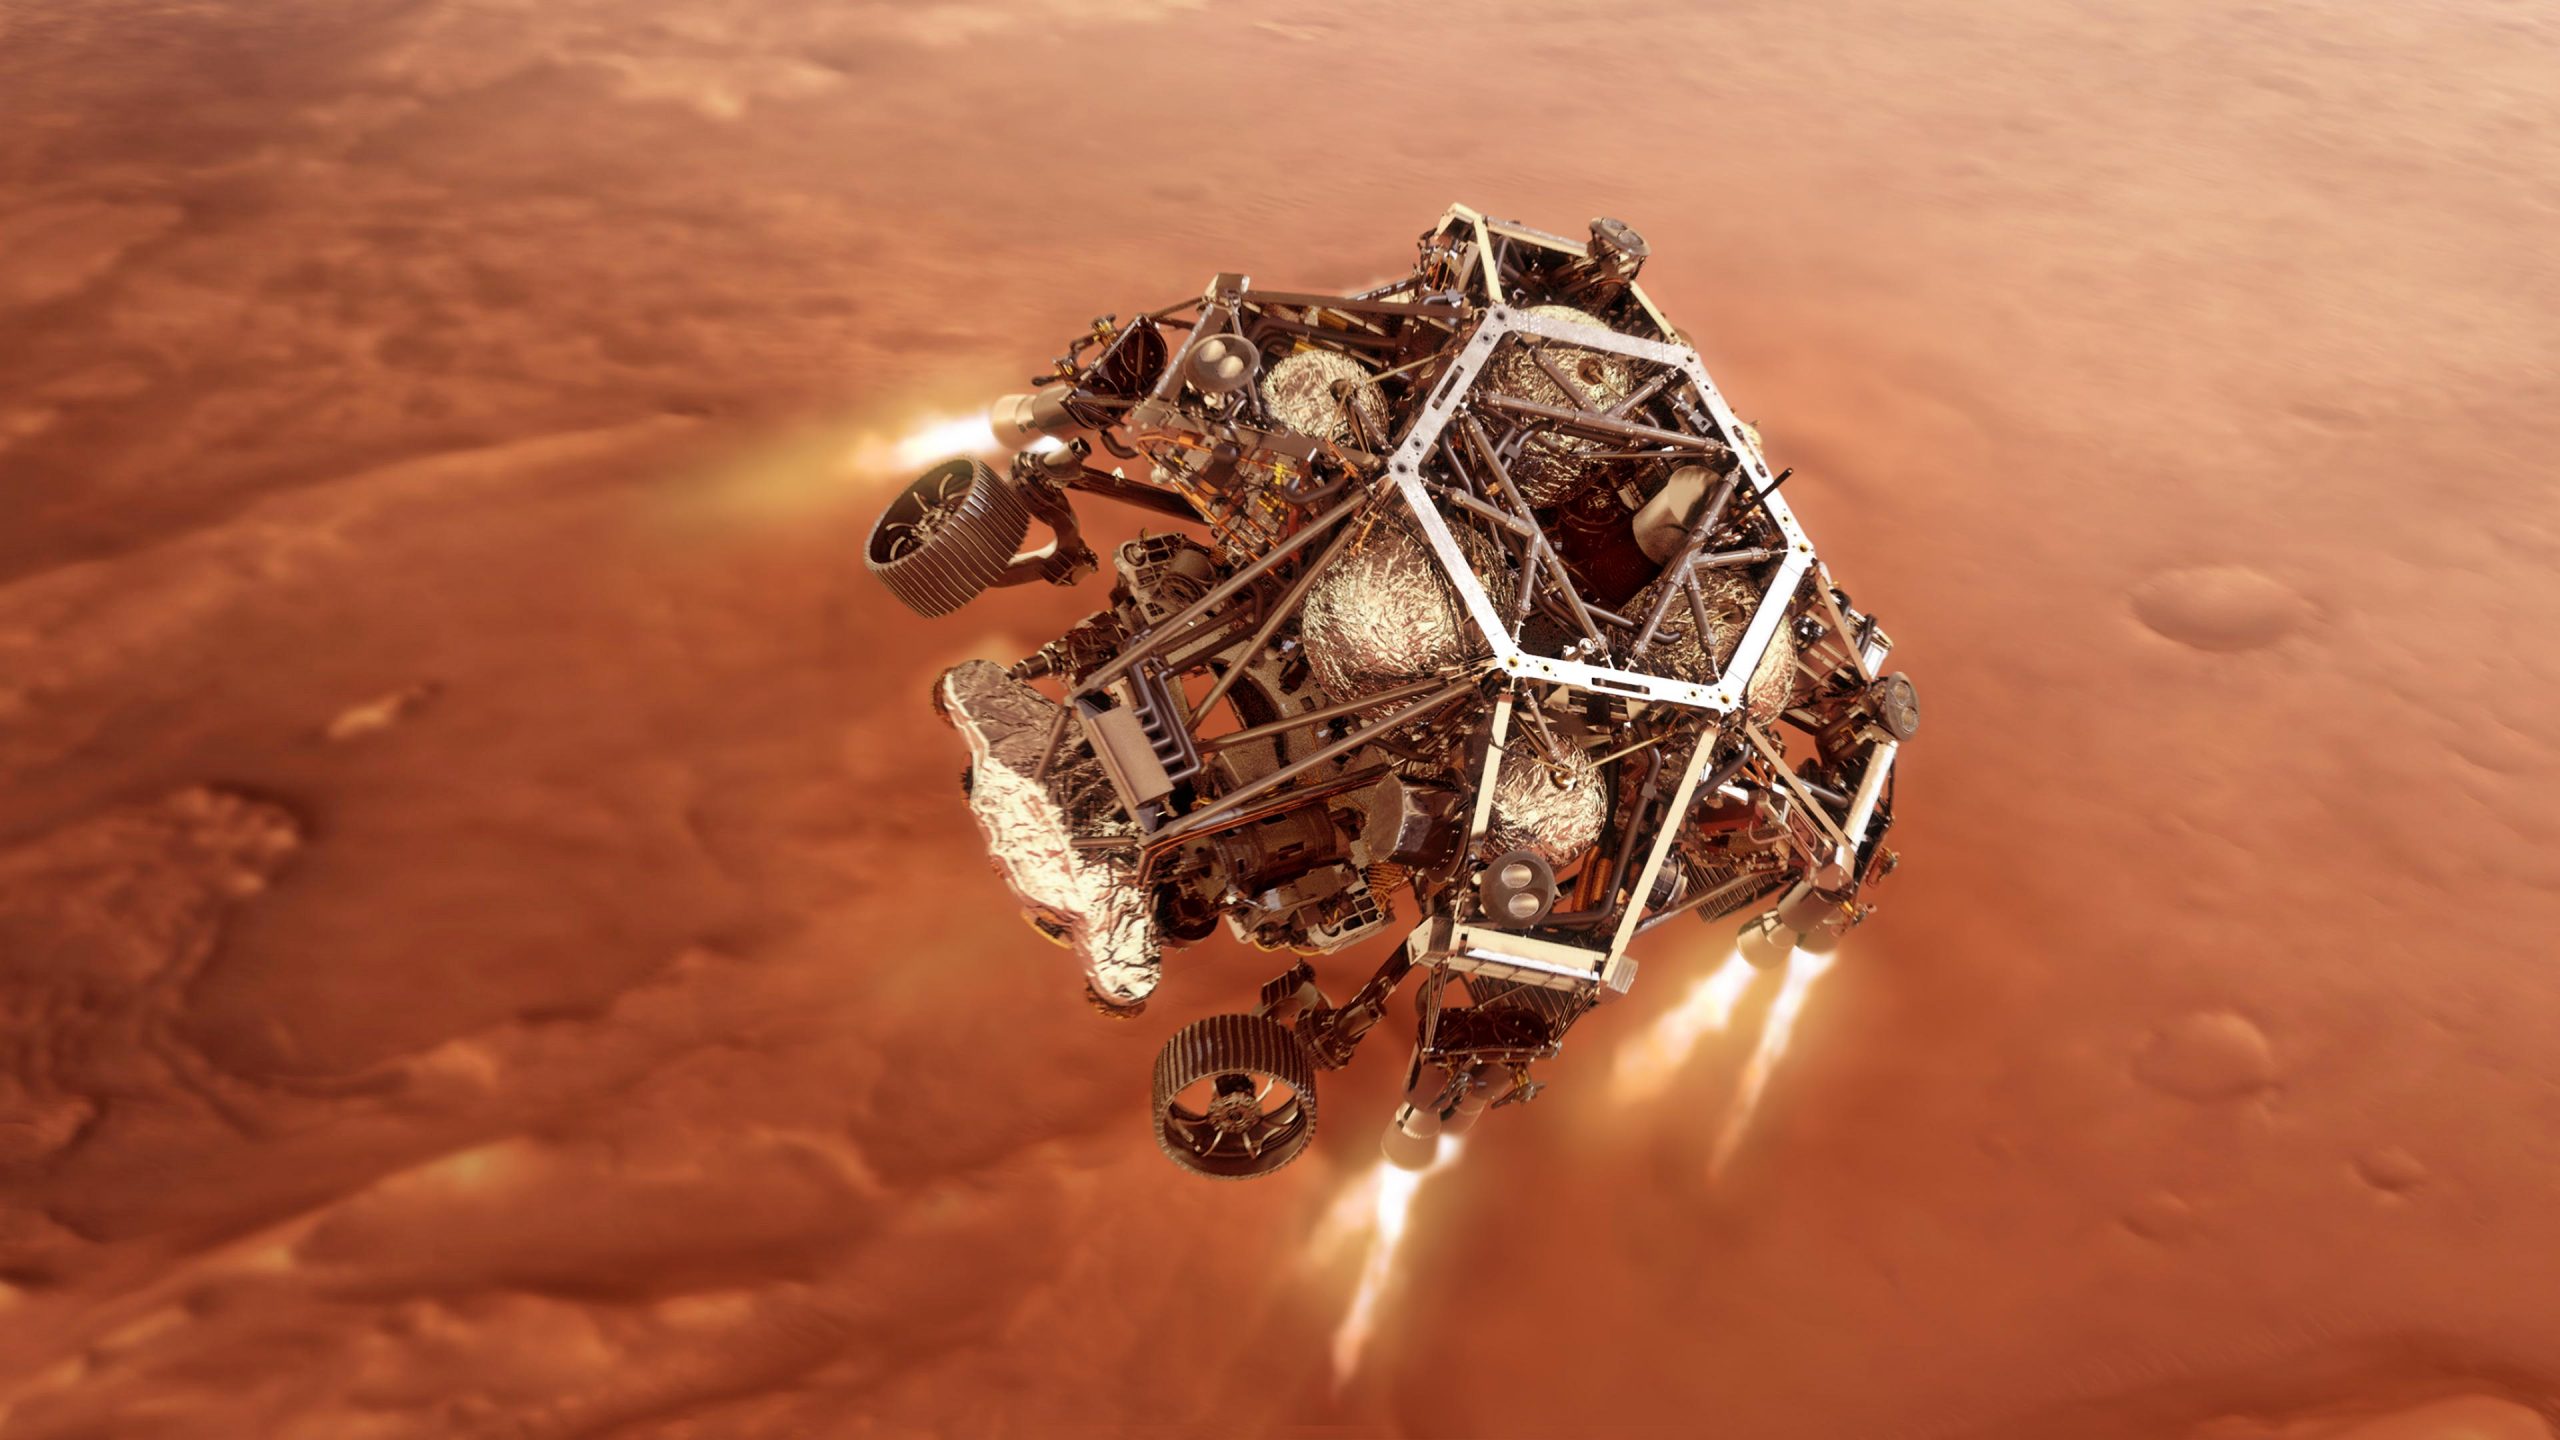 7 Minutes to Mars: NASA's Perseverance Rover Attempts Most Dangerous Landing Yet Video